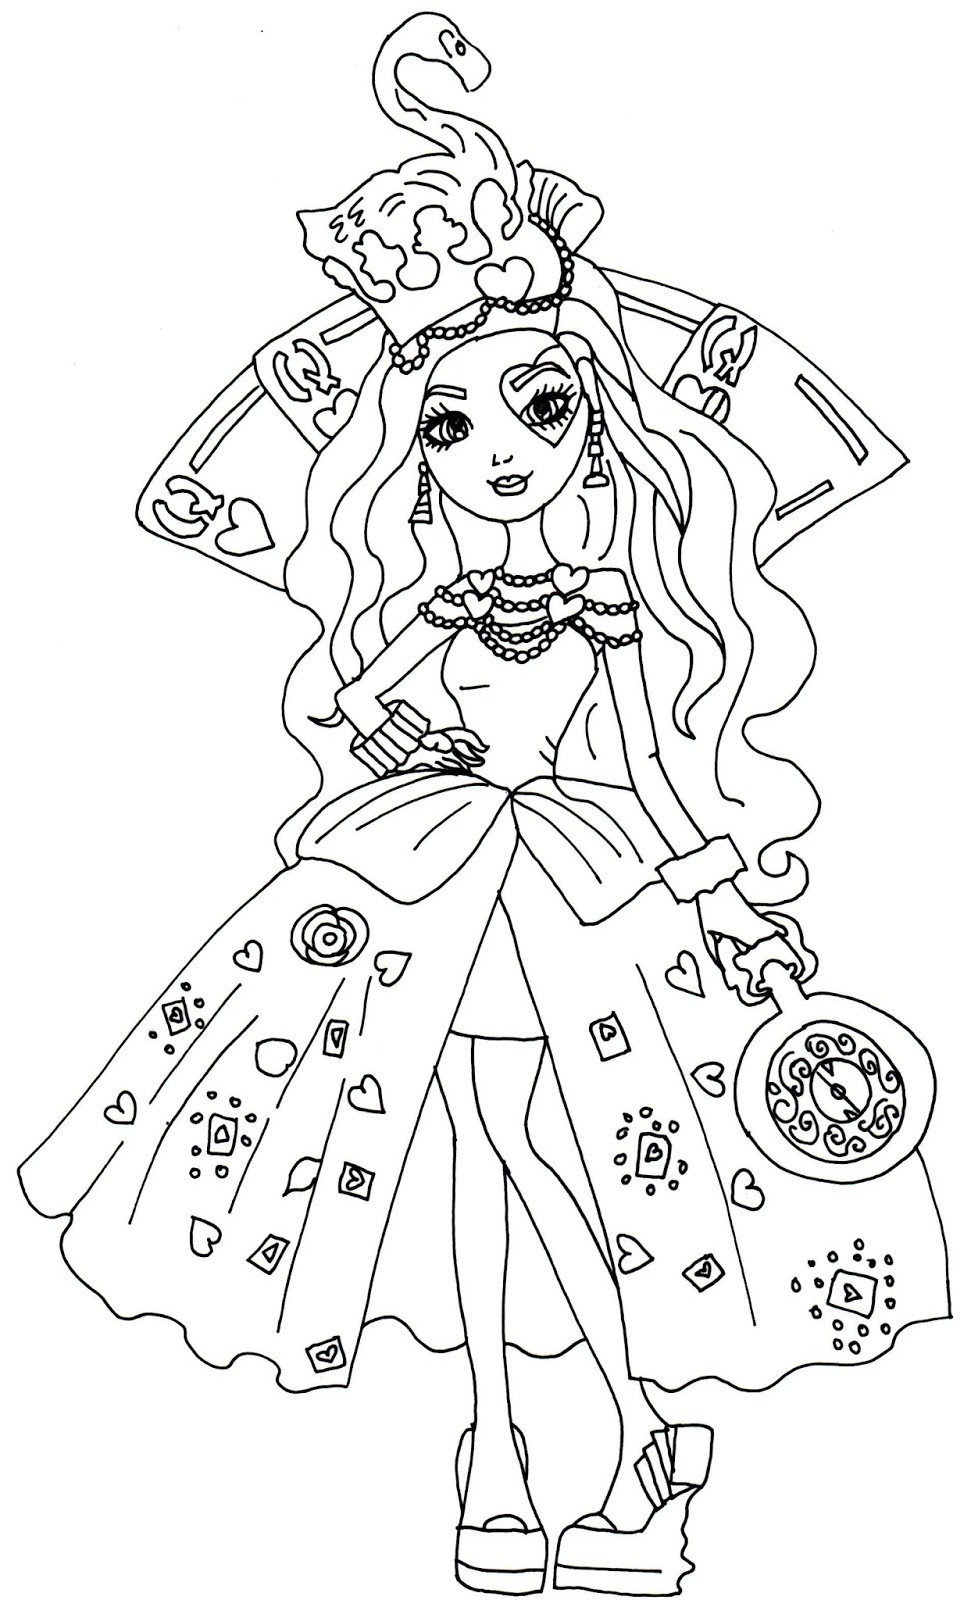 Free Coloring Pages No Printing
 Ever After High Coloring Pages Best Coloring Pages For Kids